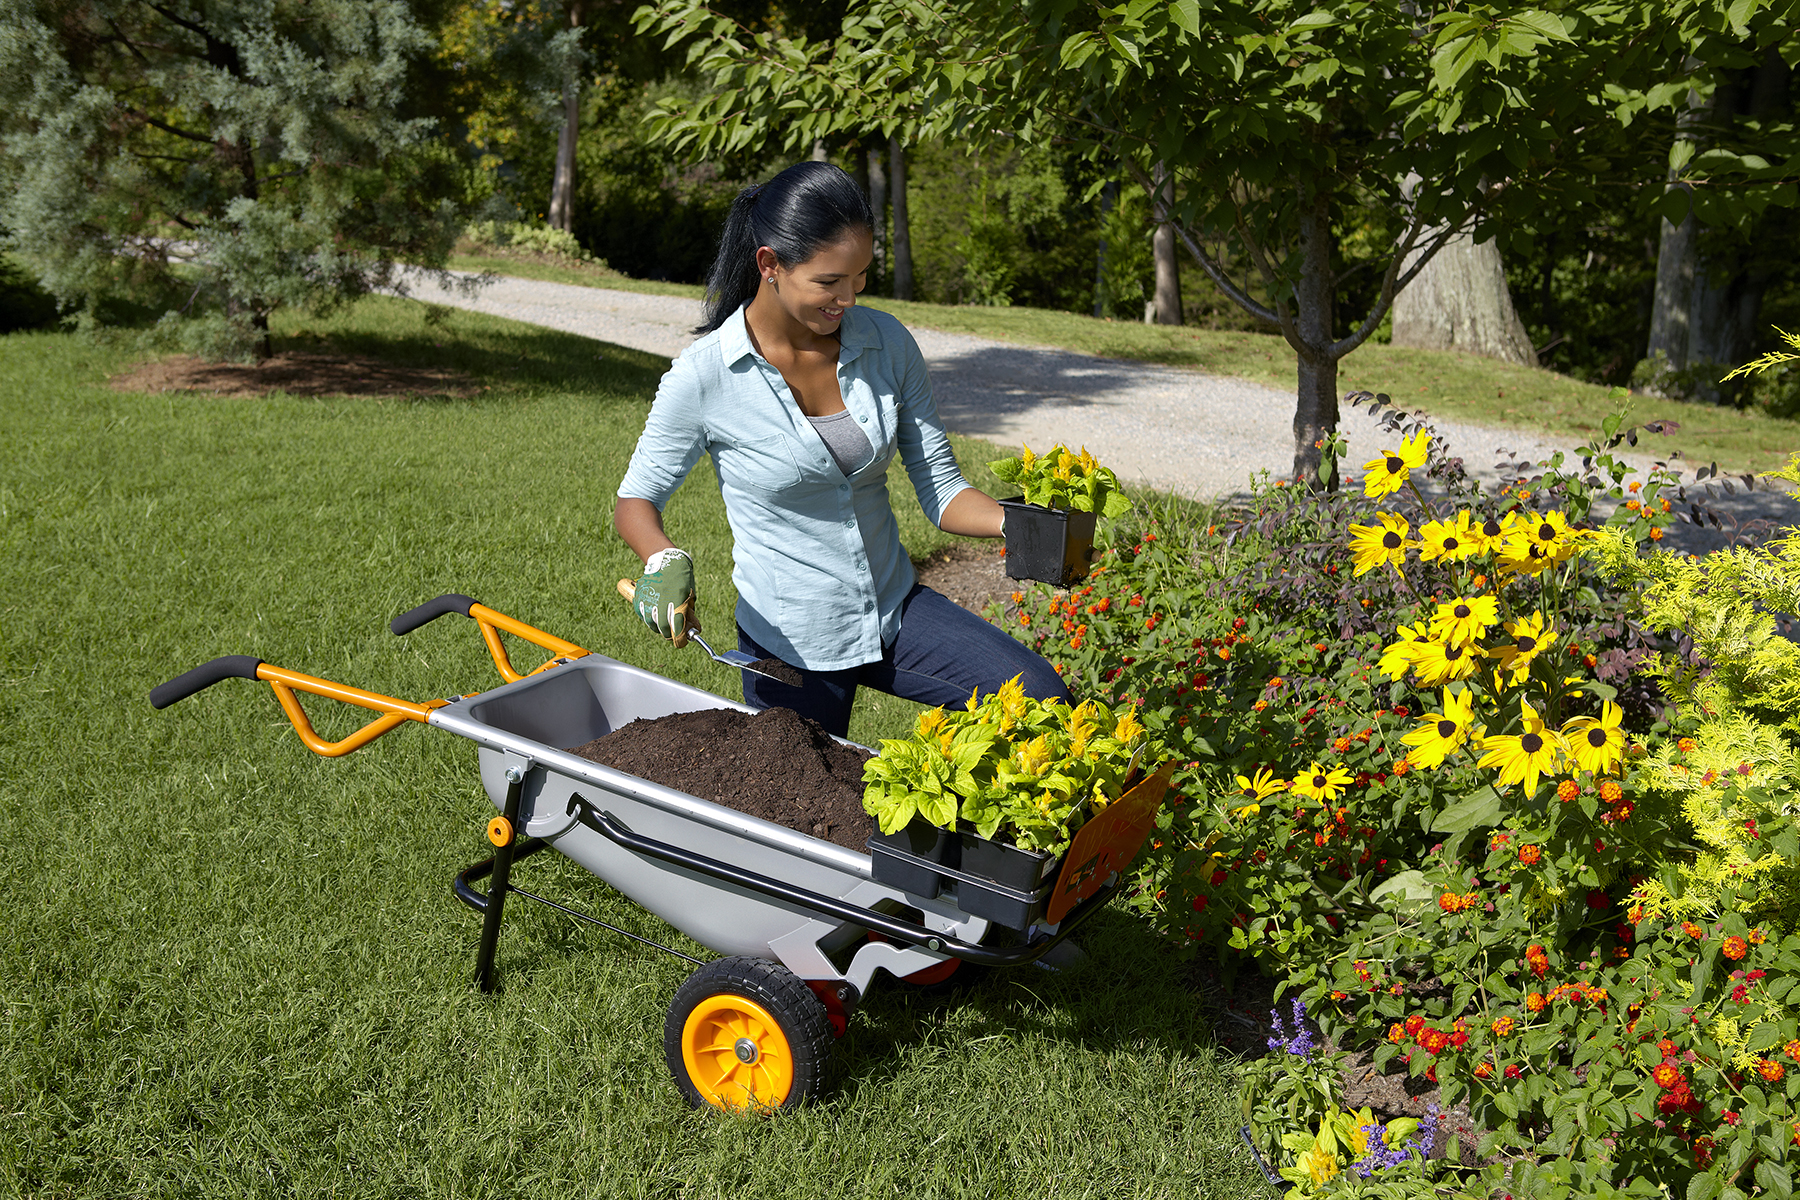 Popular Science names the Aerocart as one of “The best gardening tools for keeping your yard lush without waste”